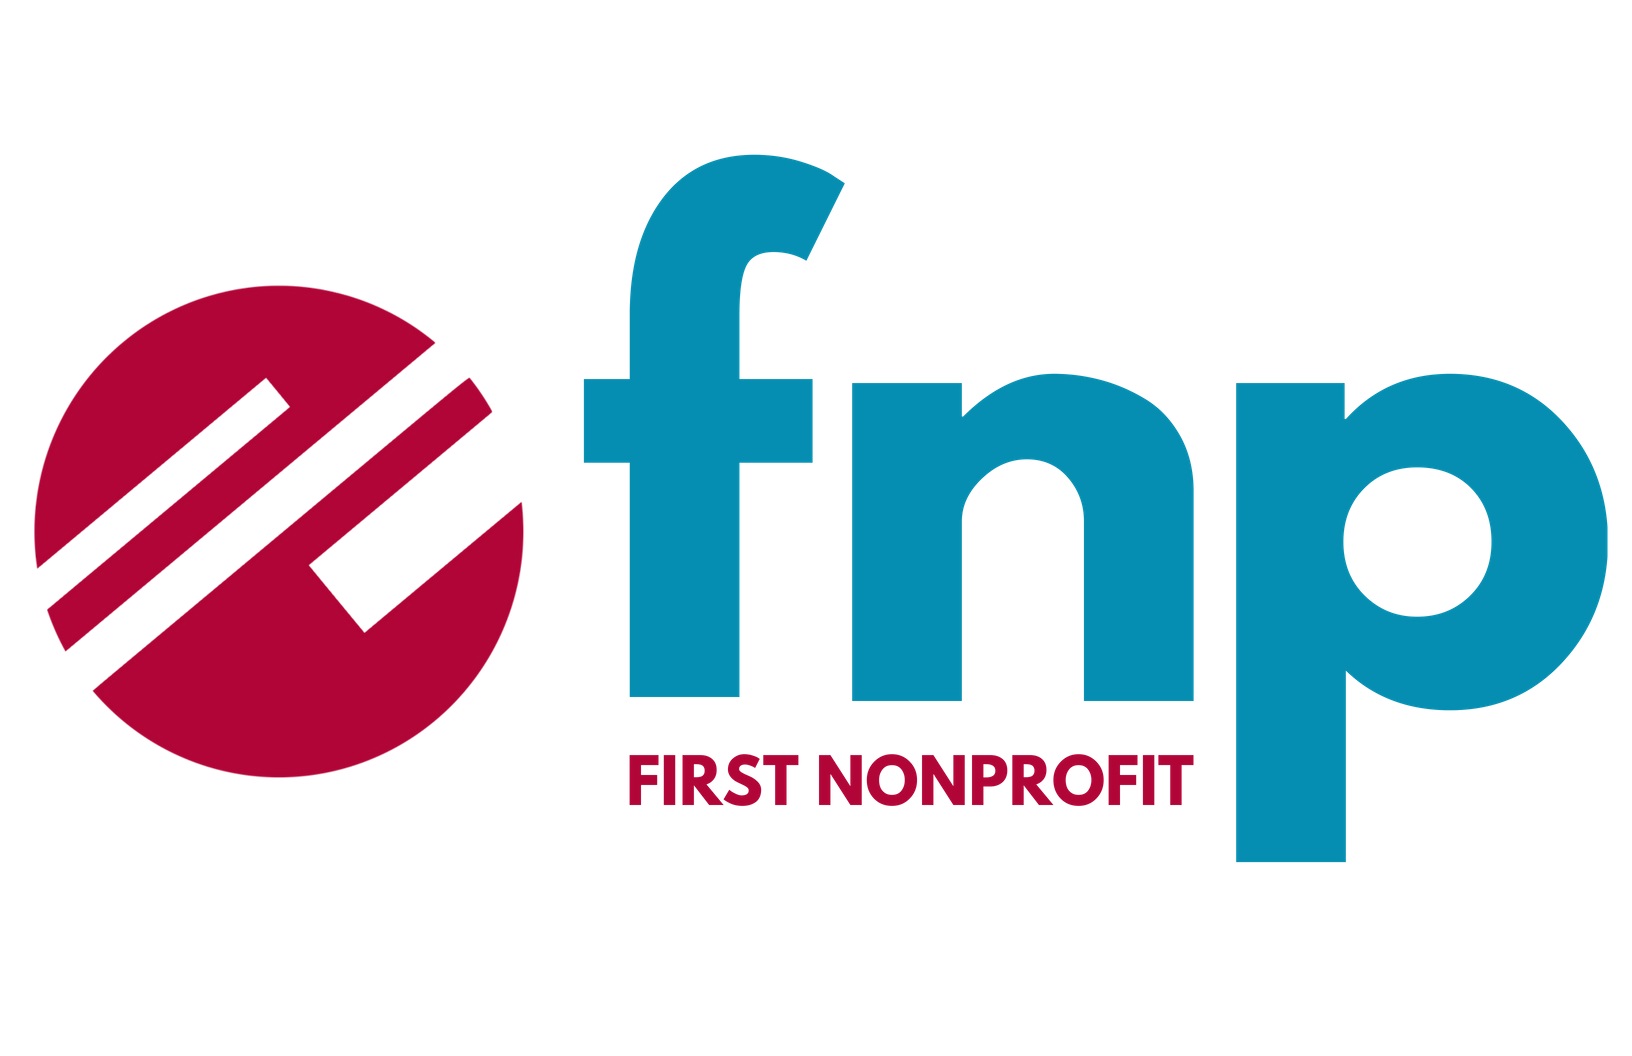 First Nonprofit Companies